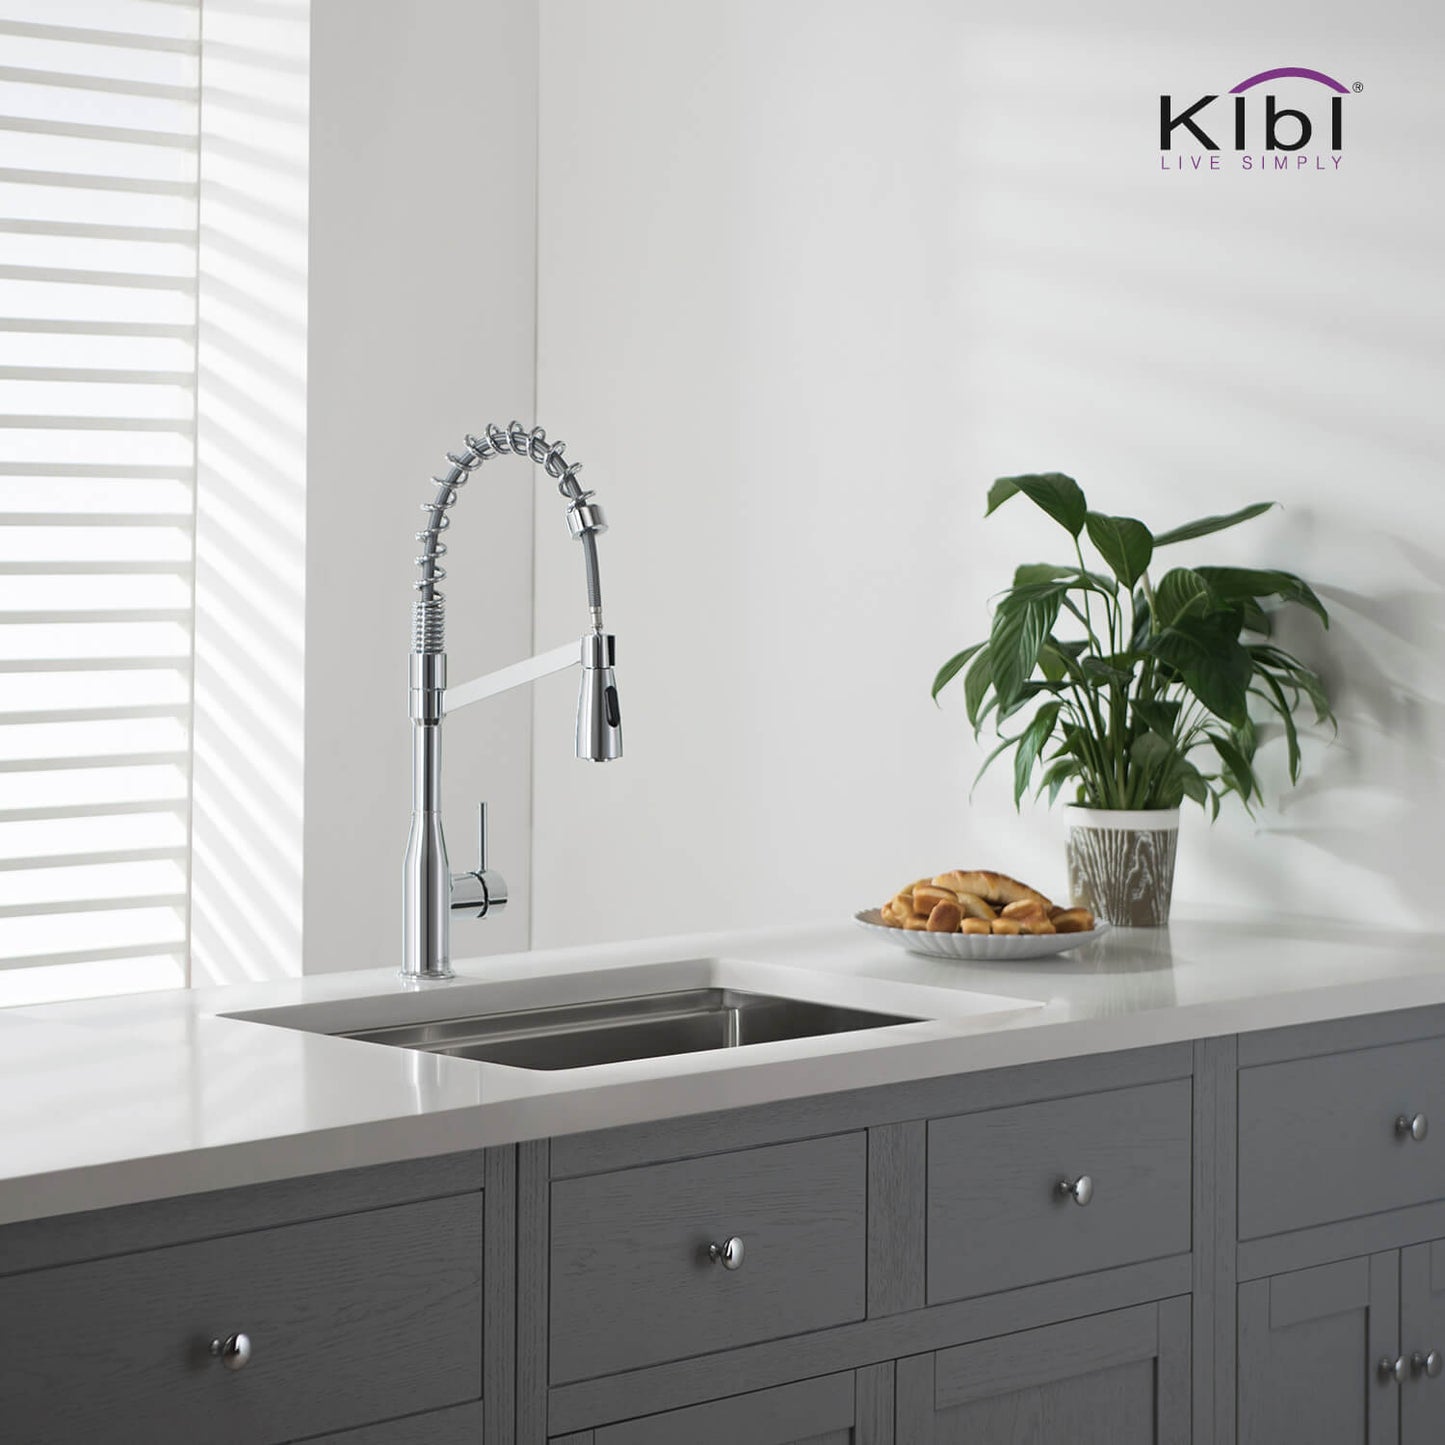 Kibi Largo Single Handle Pull Down Kitchen Faucet With Soap Dispenser in Chrome Finish